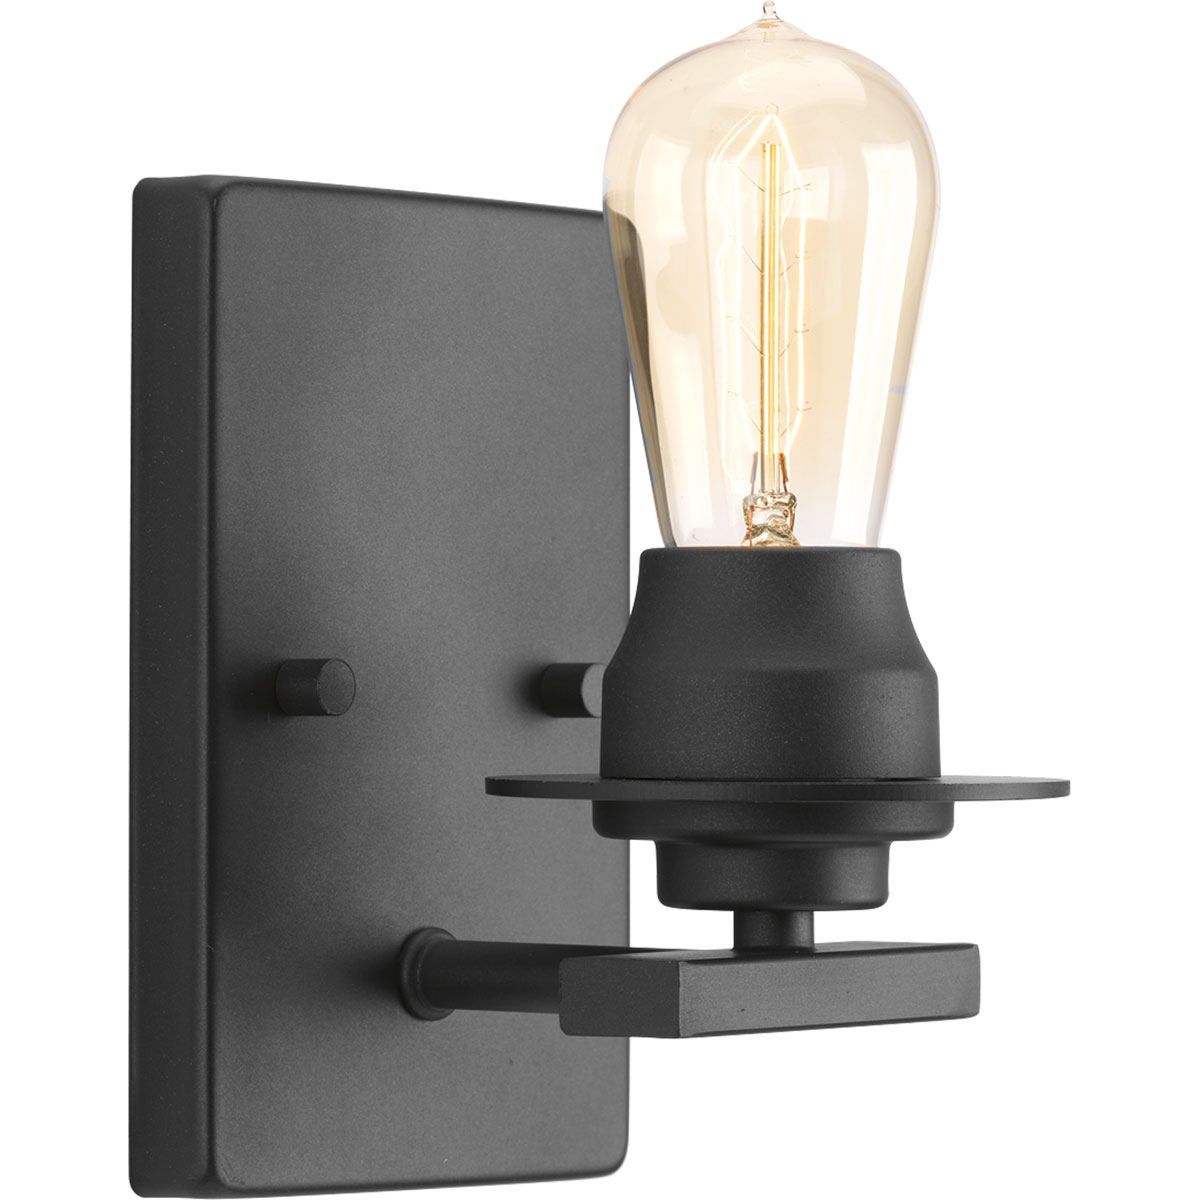 Graphite wall sconce with Edison bulb from Progress Lighting